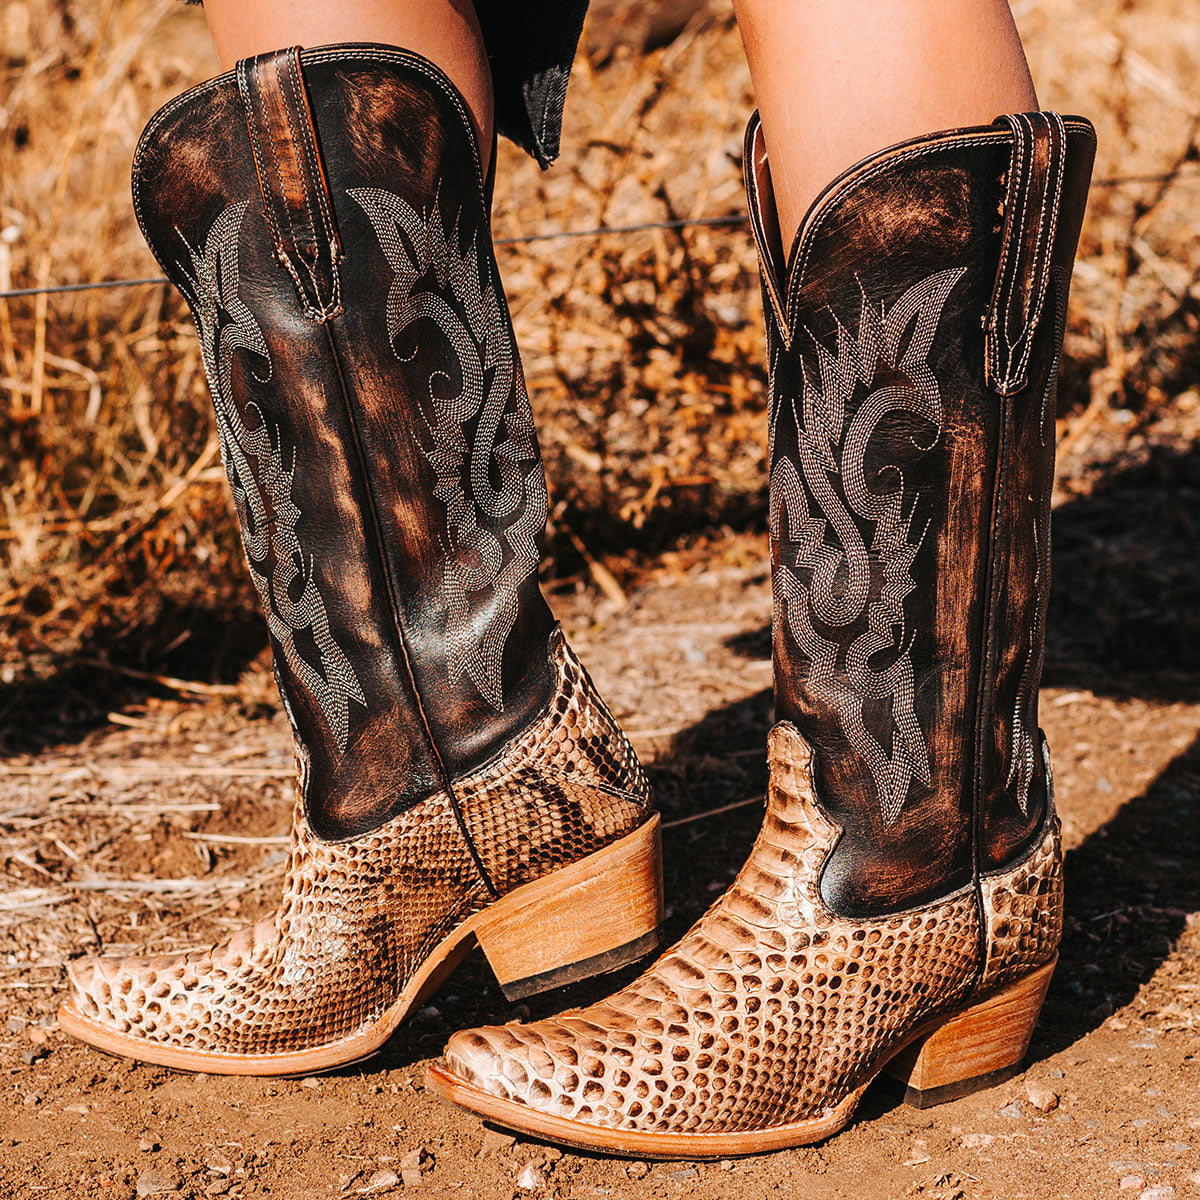 FREEBIRD women's Woodland beige python multi leather cowboy boot with stitch detailing and snip toe construction